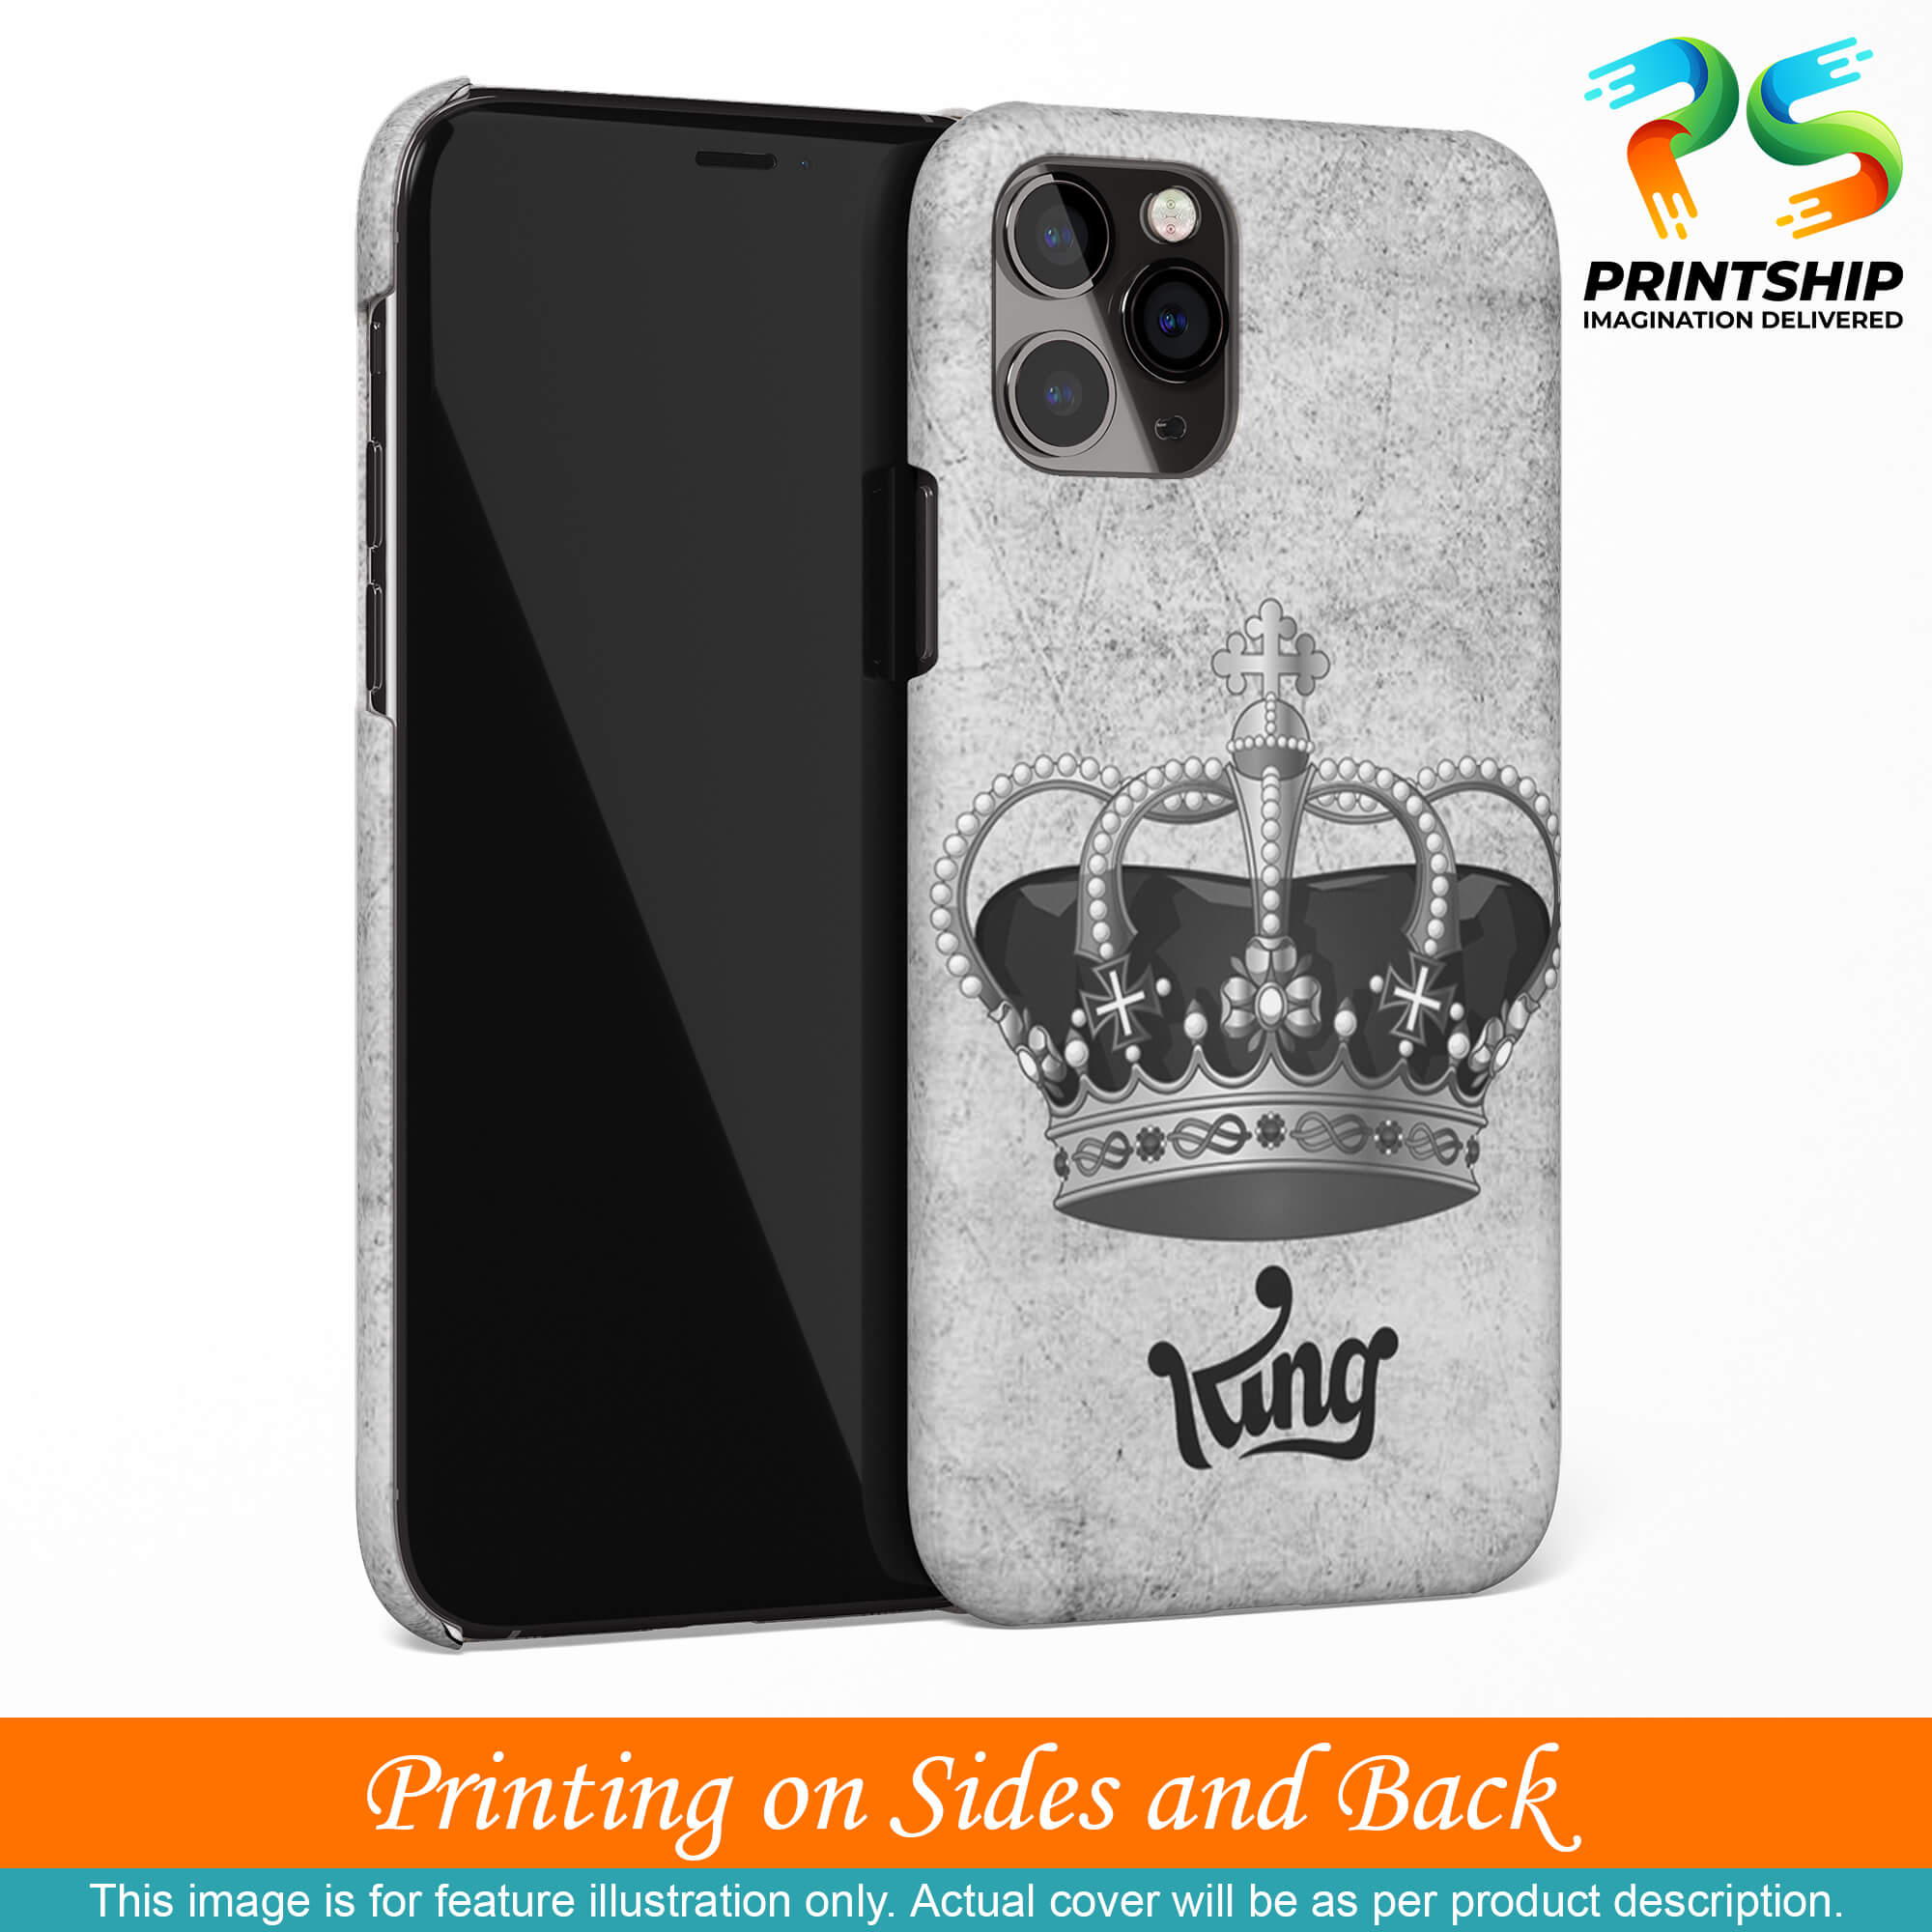 BT0229-King Back Cover for Apple iPhone 7-Image3